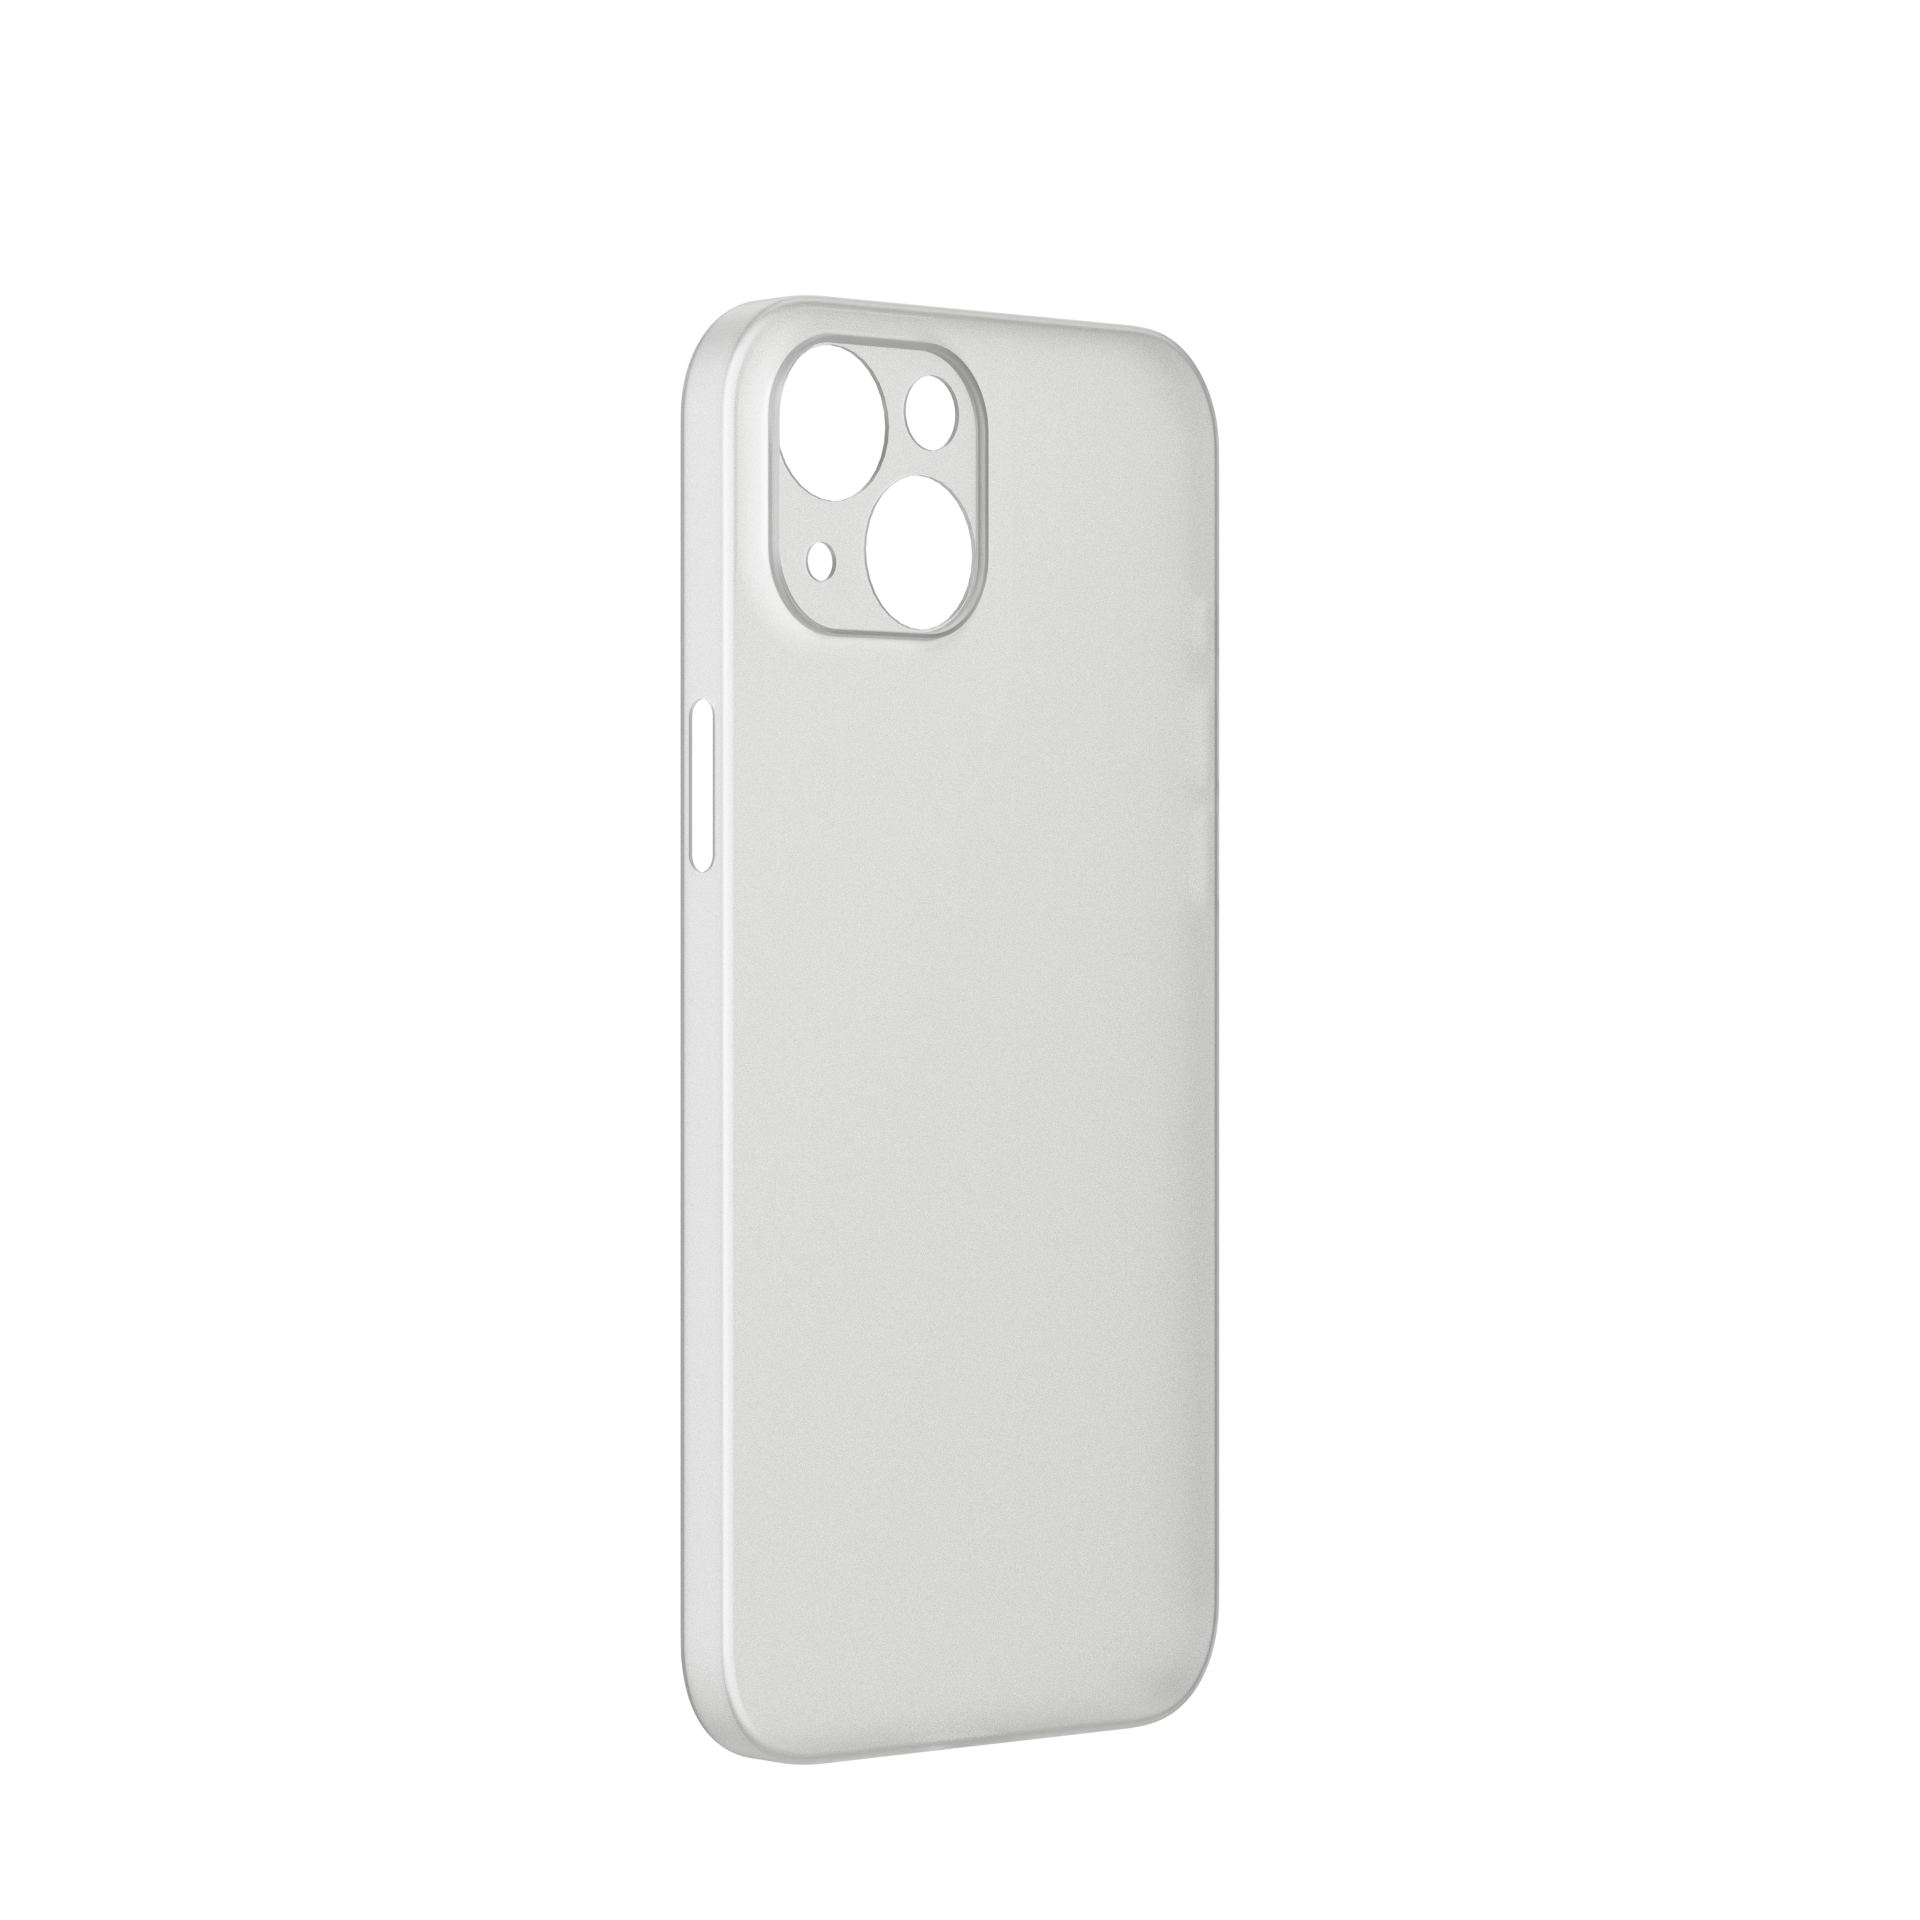 iPhone 13 Thin Case - Phnx Frosted White